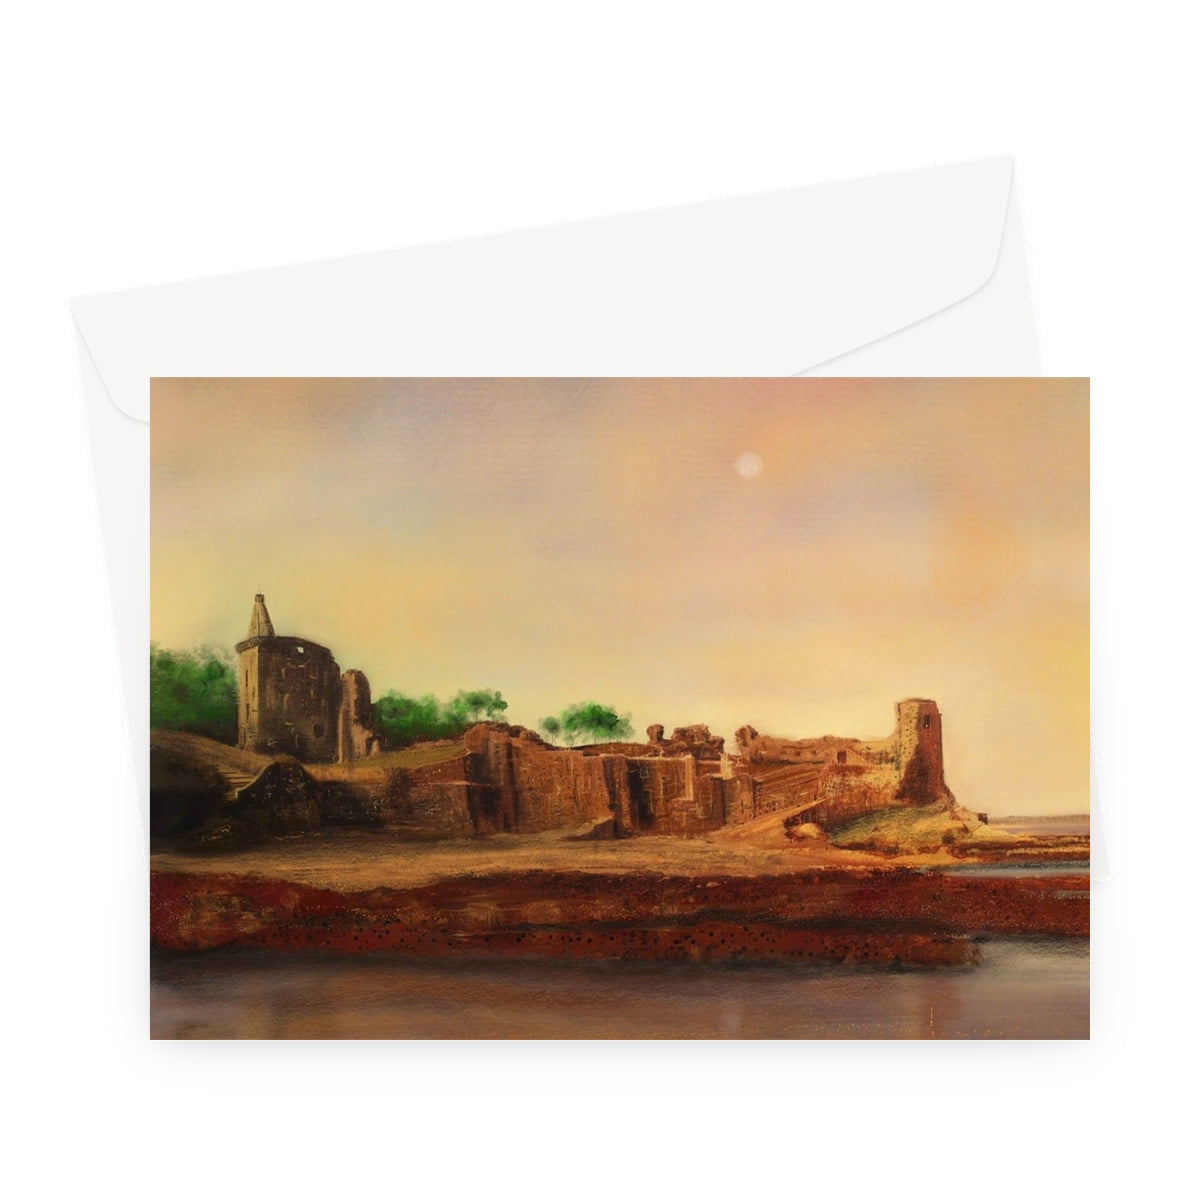 St Andrews Castle Art Gifts Greeting Card-Greetings Cards-Historic & Iconic Scotland Art Gallery-A5 Landscape-1 Card-Paintings, Prints, Homeware, Art Gifts From Scotland By Scottish Artist Kevin Hunter